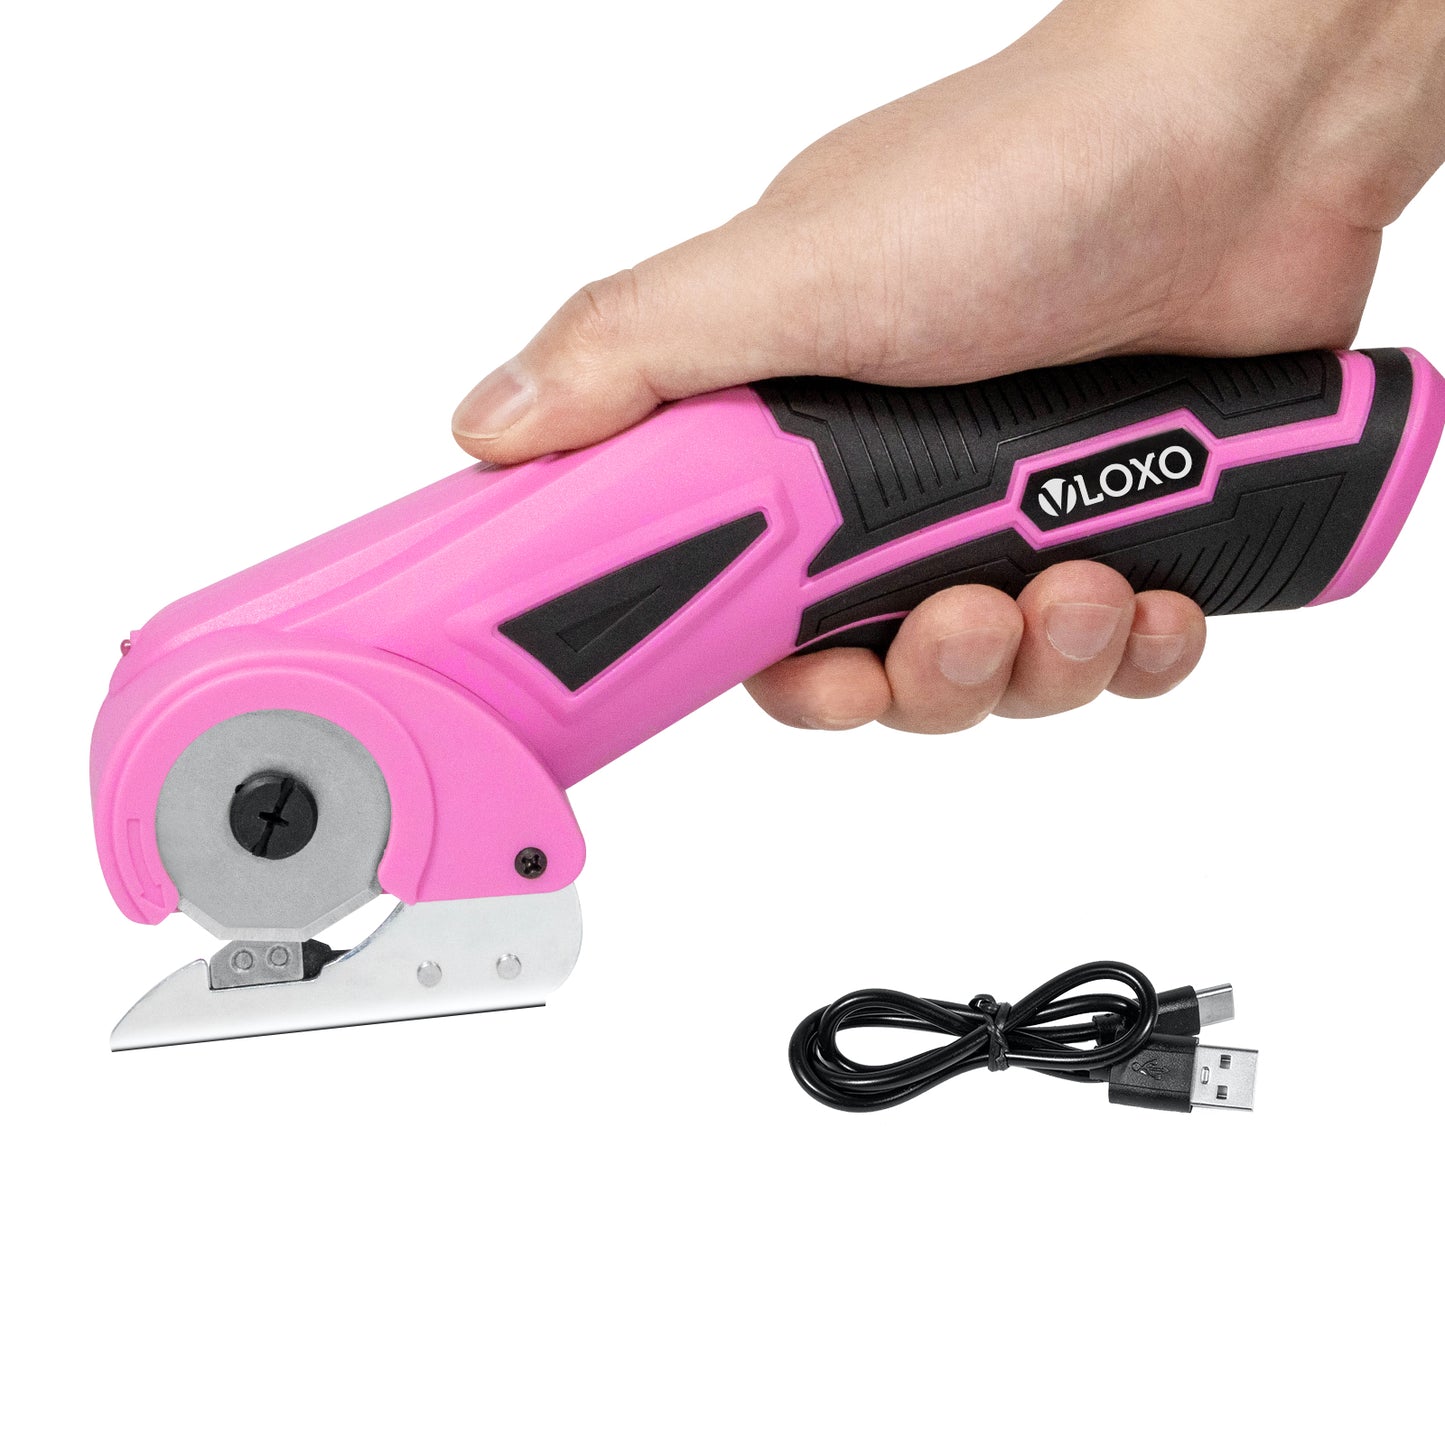 VLOXO Cordless Electric Scissors with 2 Blades Rechargeable